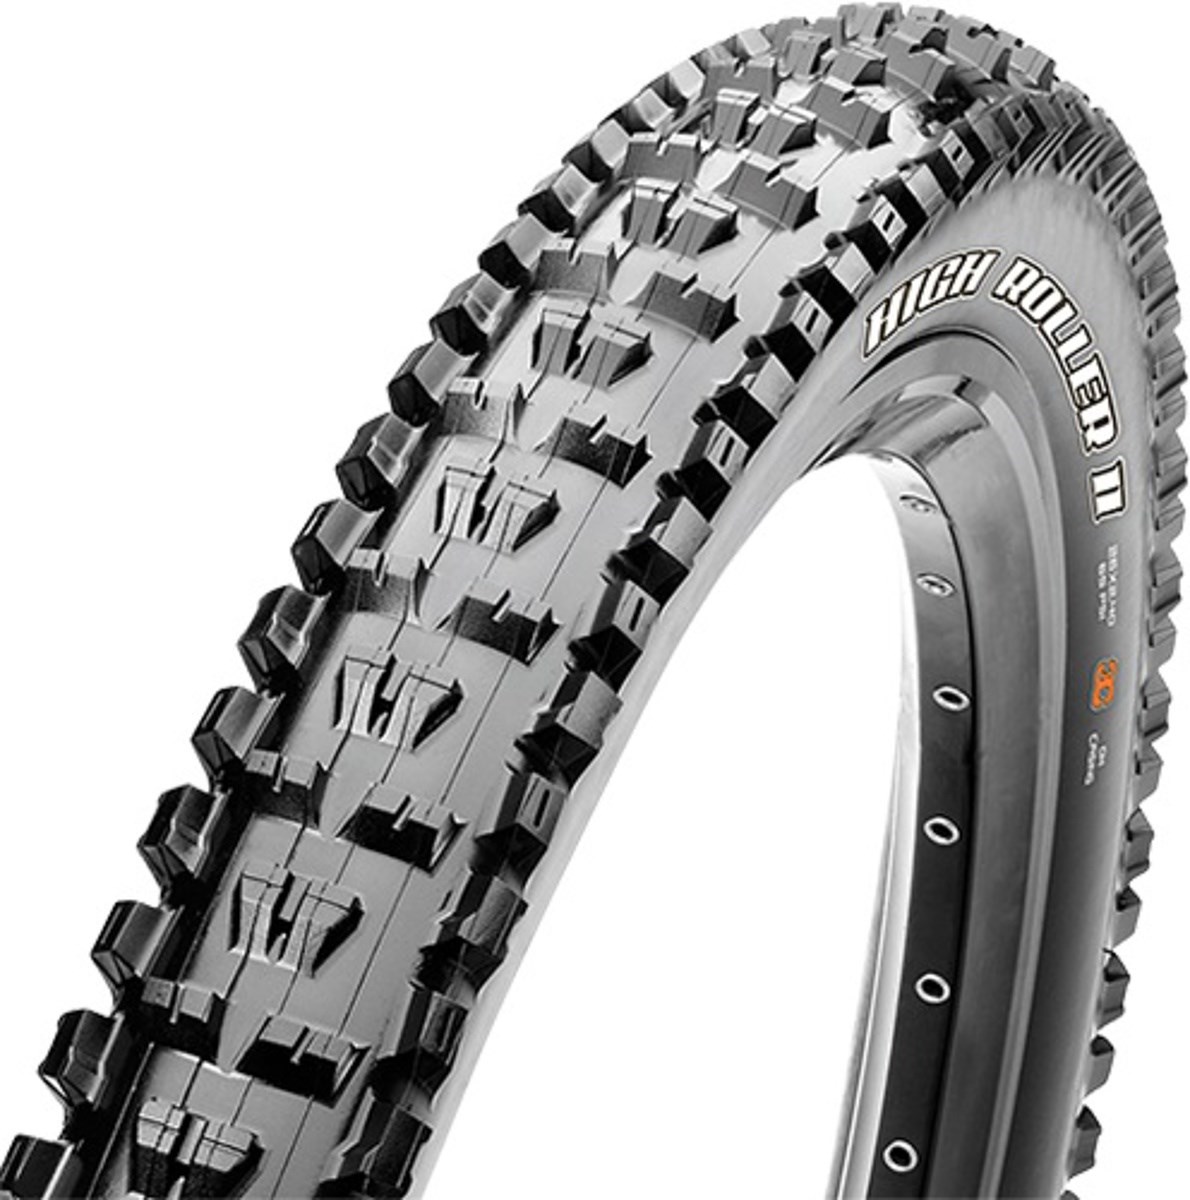 Maxxis High Roller II 29er Off Road MTB Tyre product image